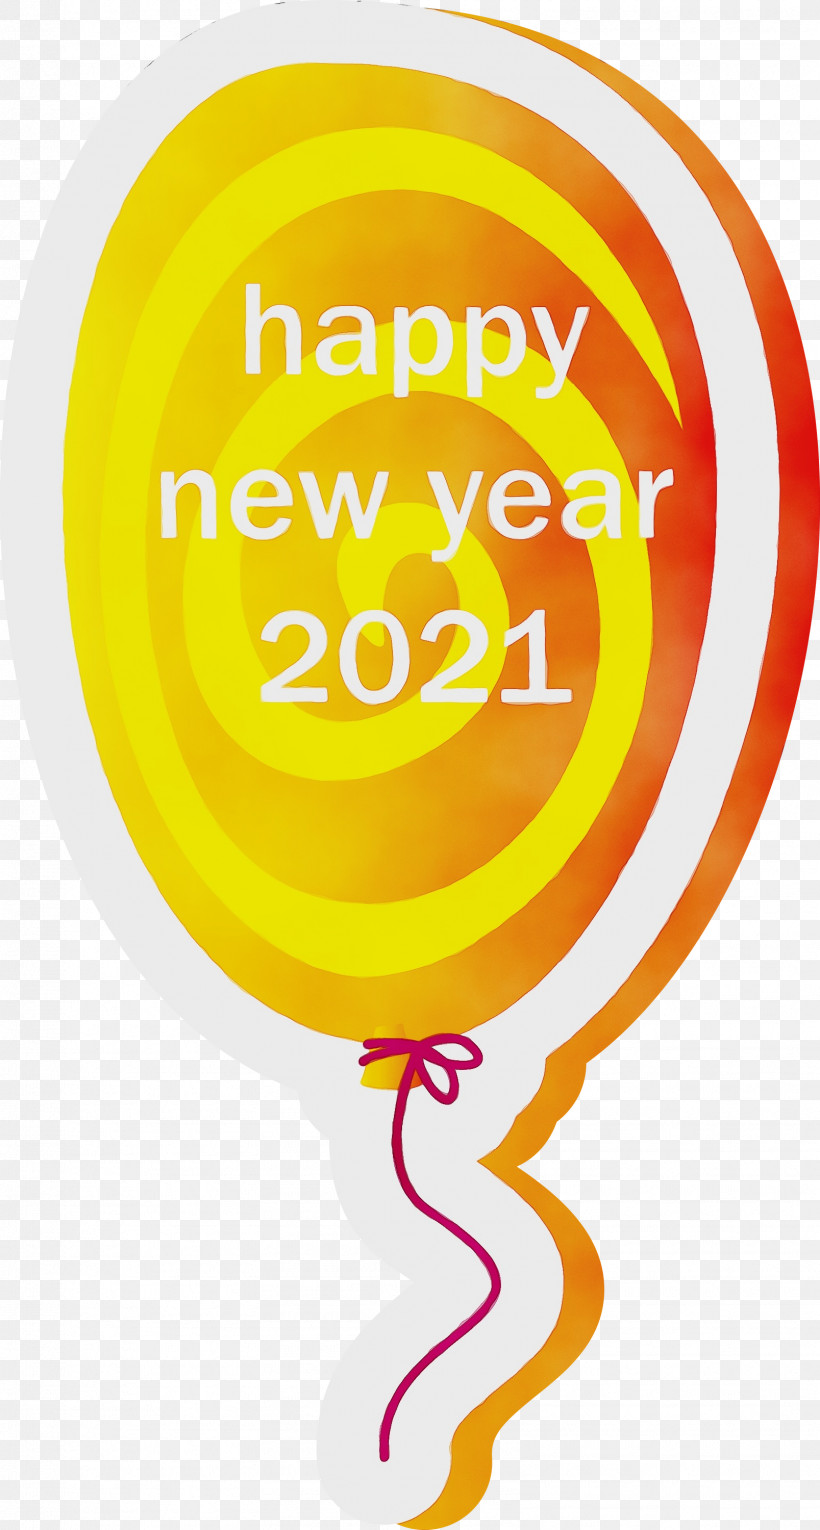 Yellow Meter Balloon Happiness Line, PNG, 1607x3000px, 2021 Happy New Year, Balloon, Happiness, Line, Meter Download Free